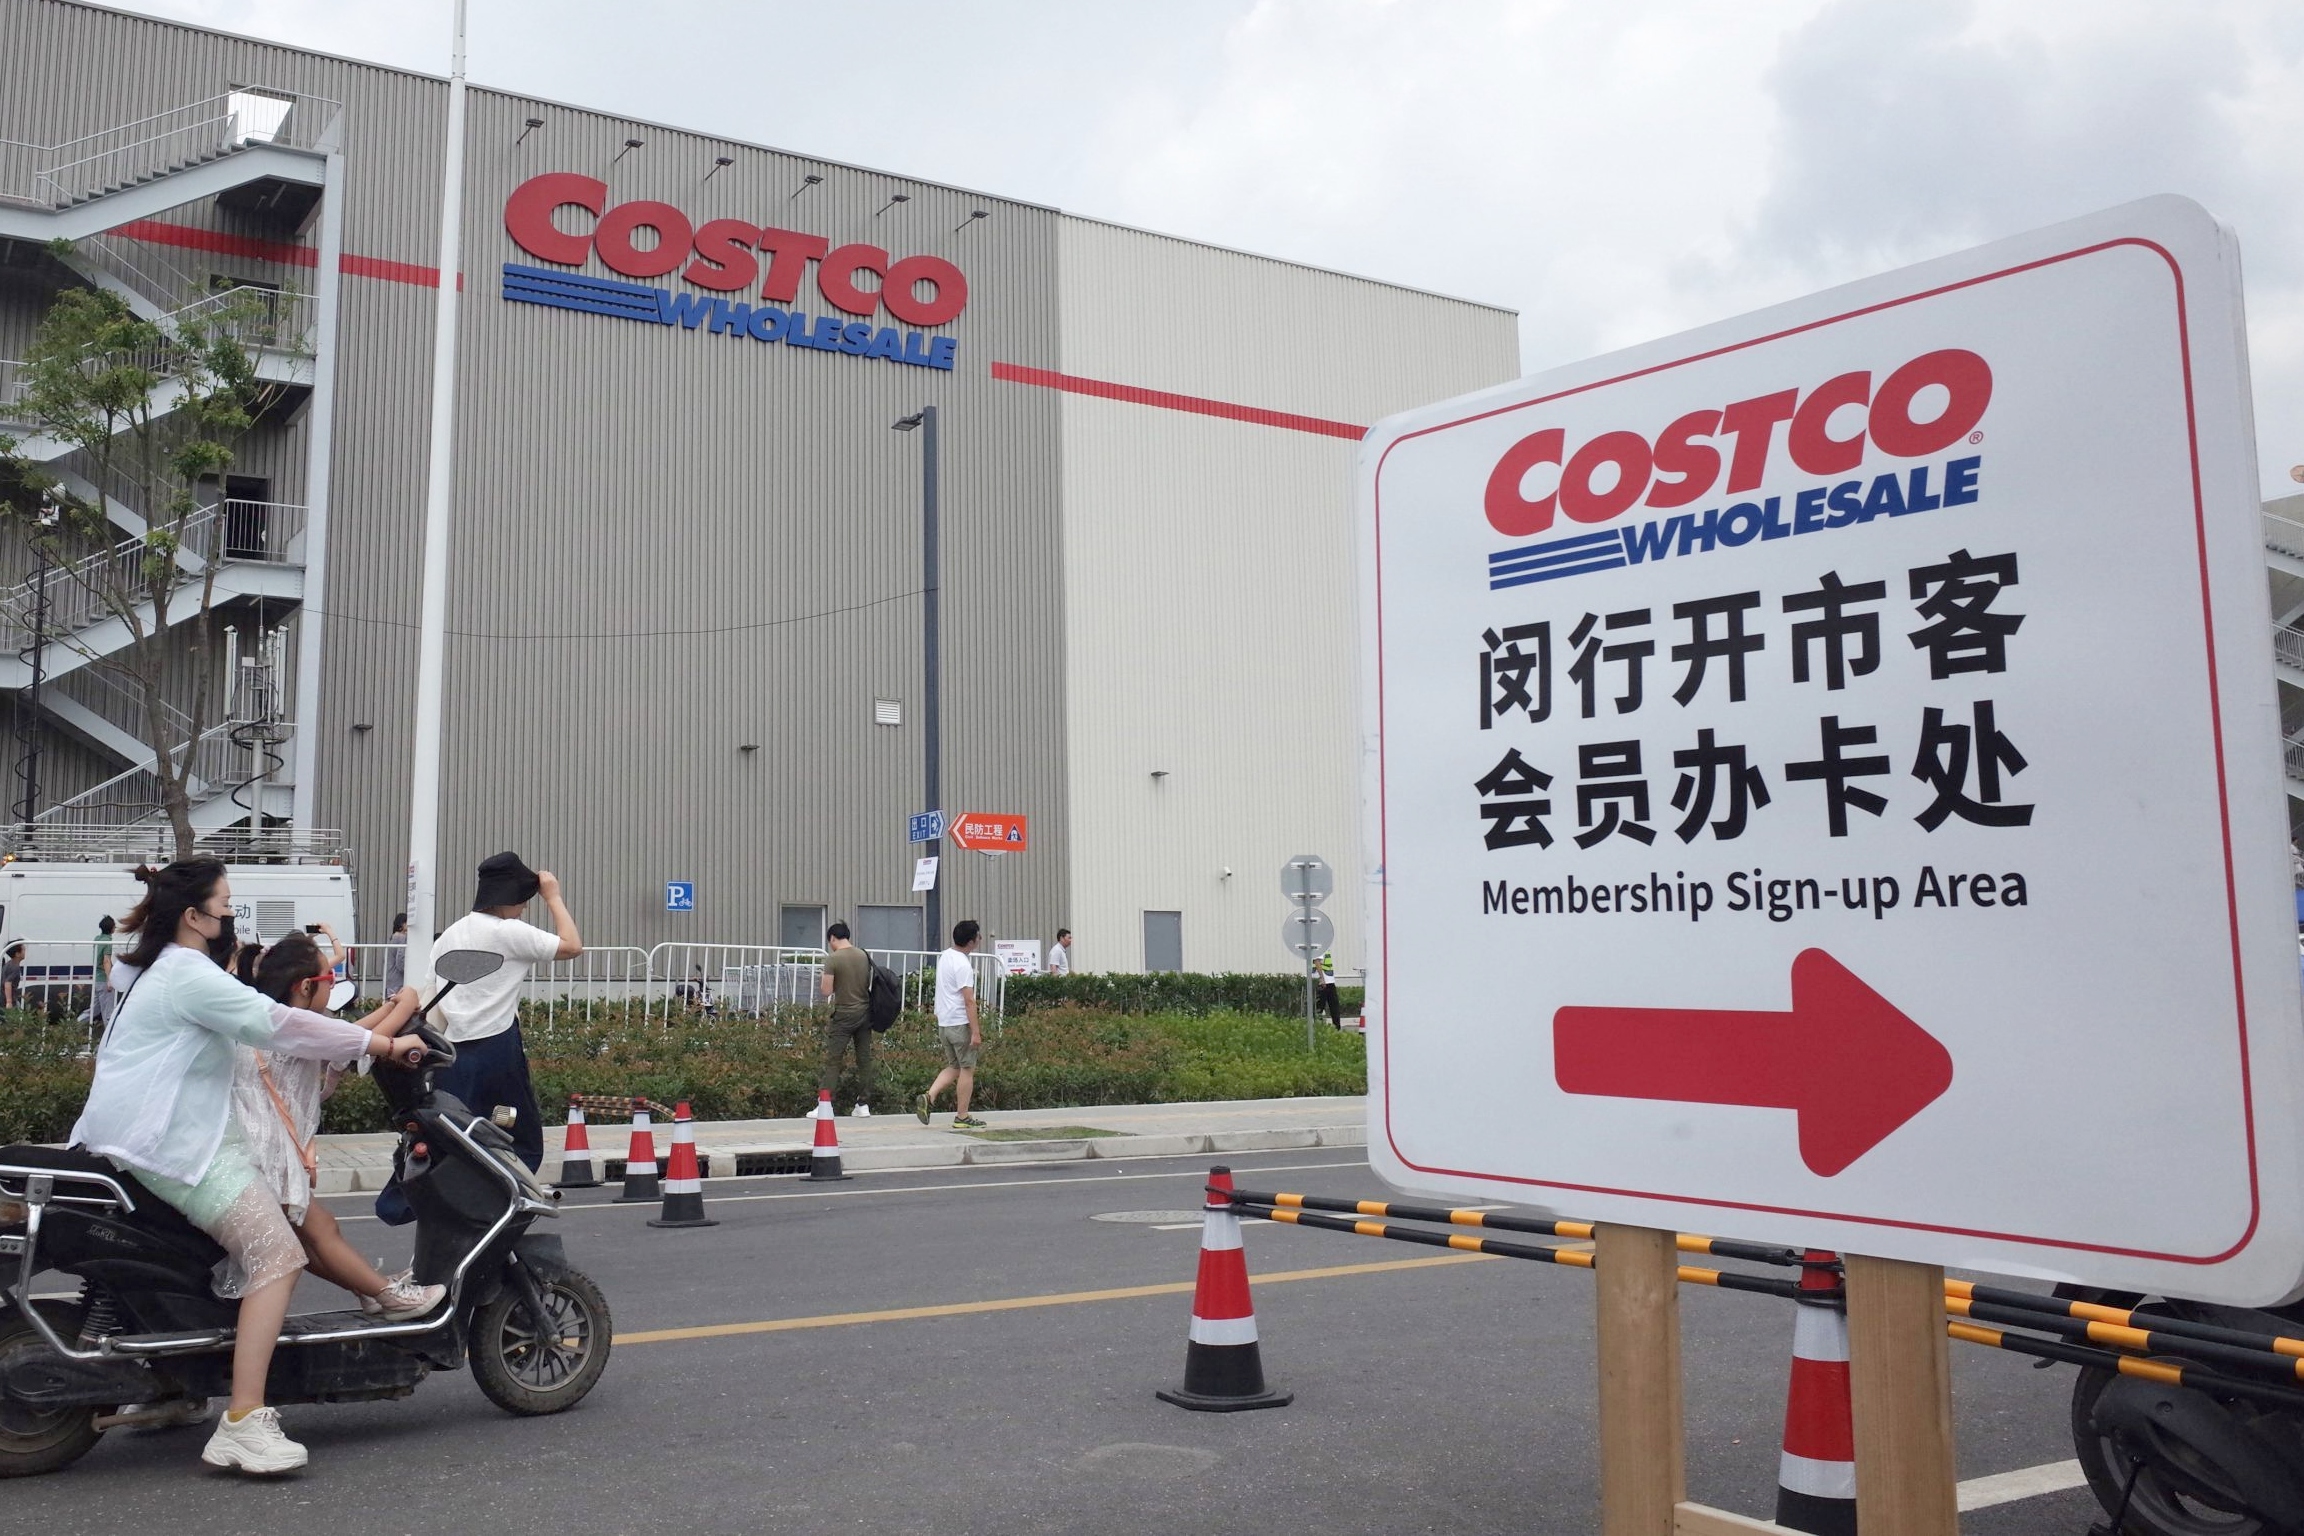 Major wholesaler retailer Costco plans to open two new locations in China and one in Japan later this year.